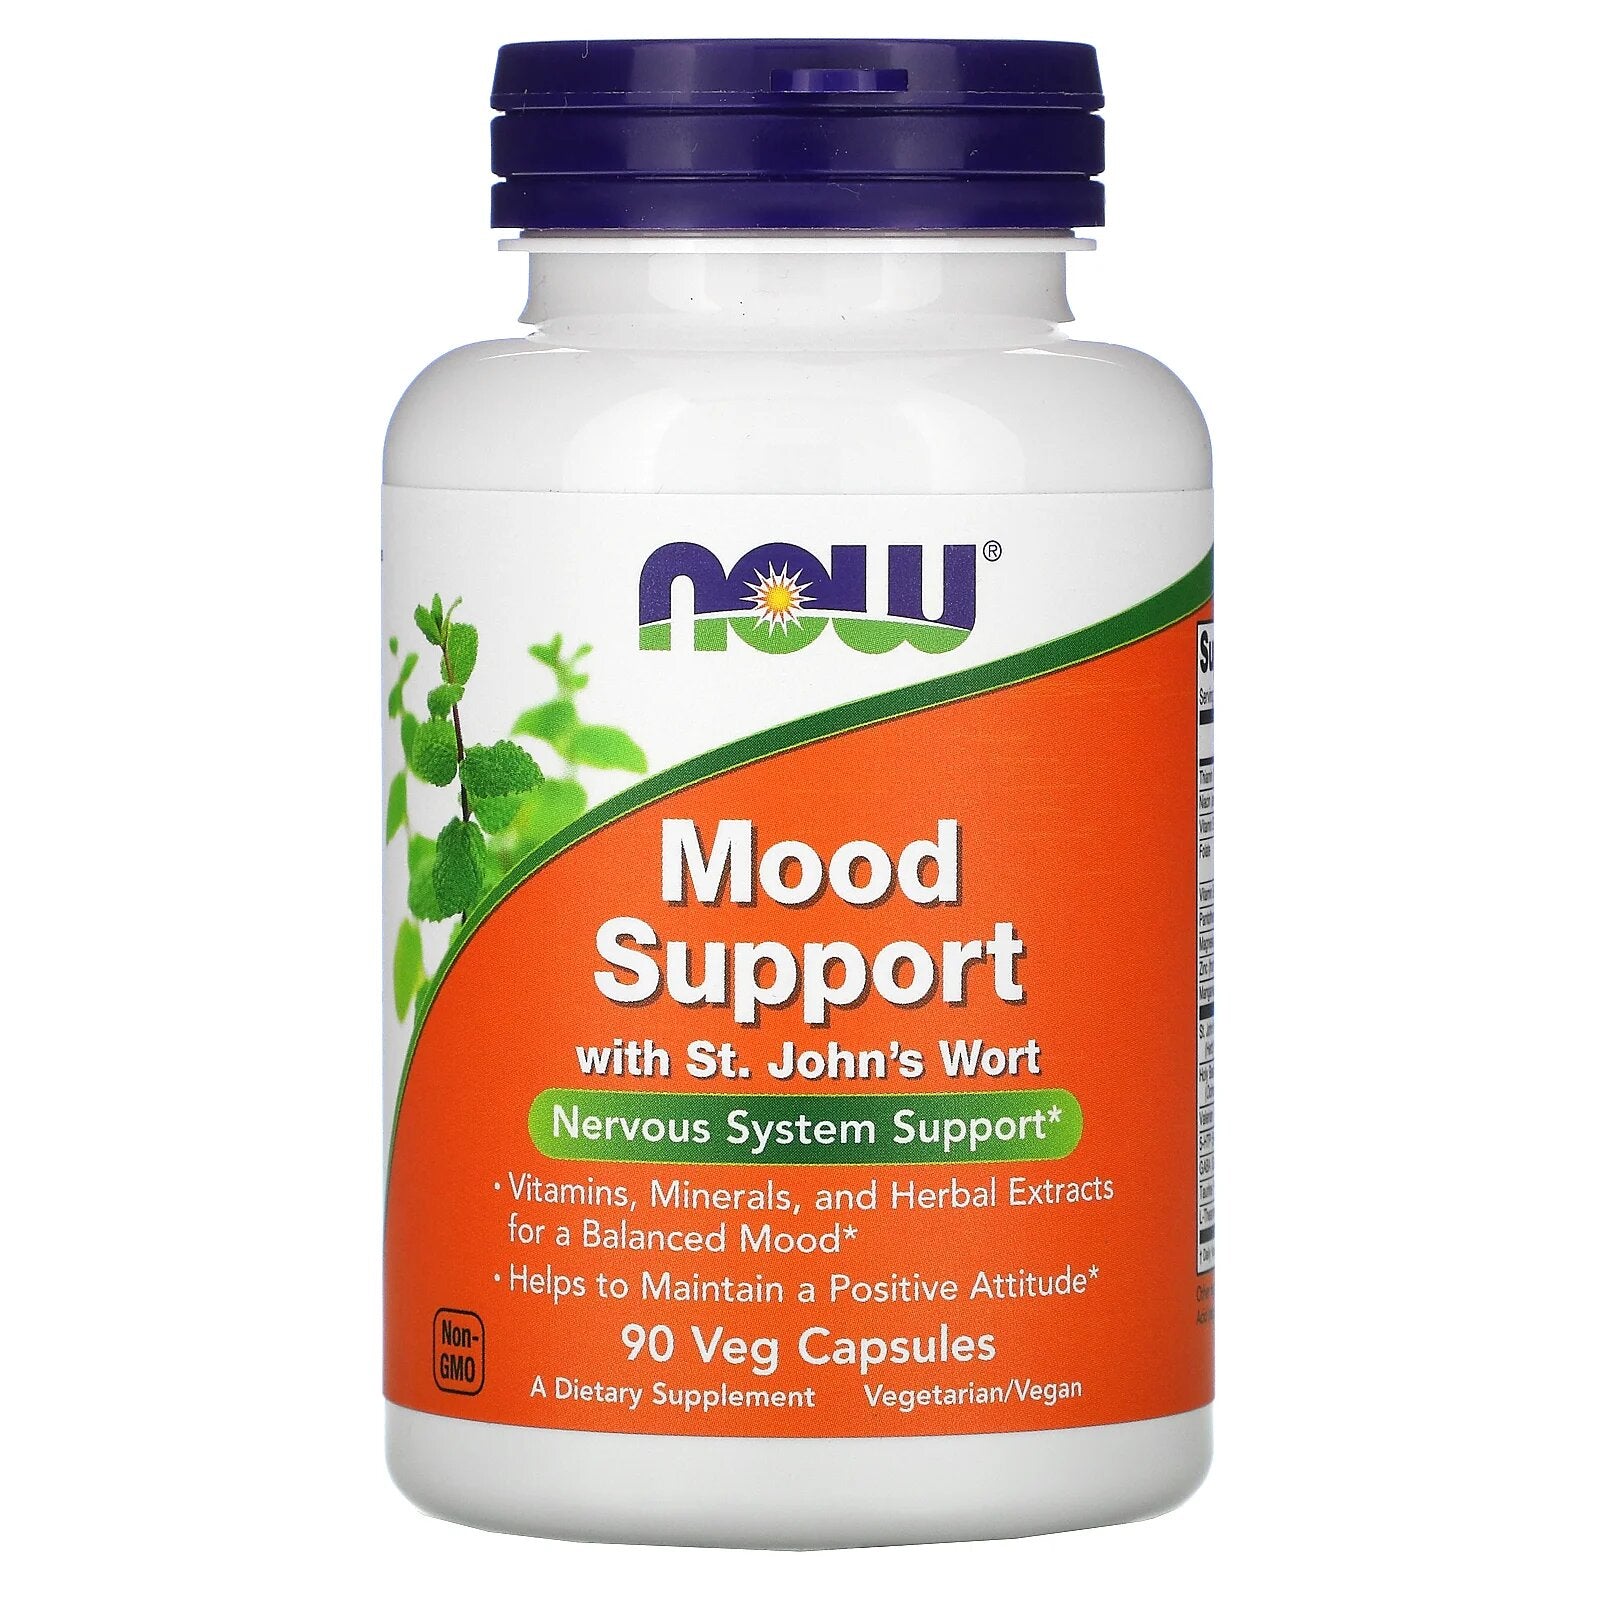 Mood Support with St. John's Wort 90 Caps